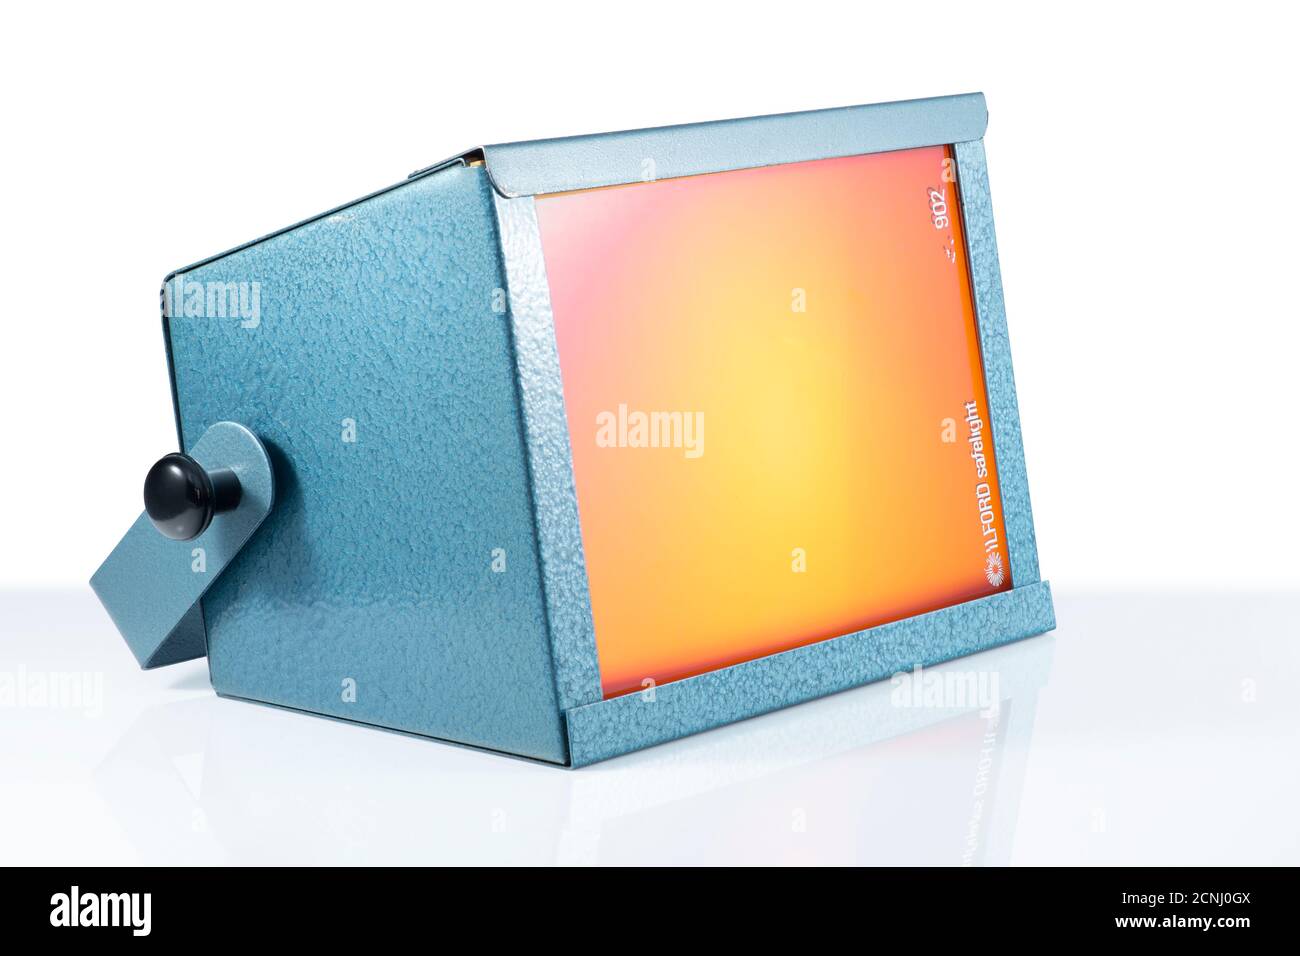 DARKROOM SAFELIGHT by ILFORD LIGHT BROWN 902 FILTER. Darkroom Safelight by Ilford Brown Filter for Film Developing Processing. Clipping Path in JPEG Stock Photo